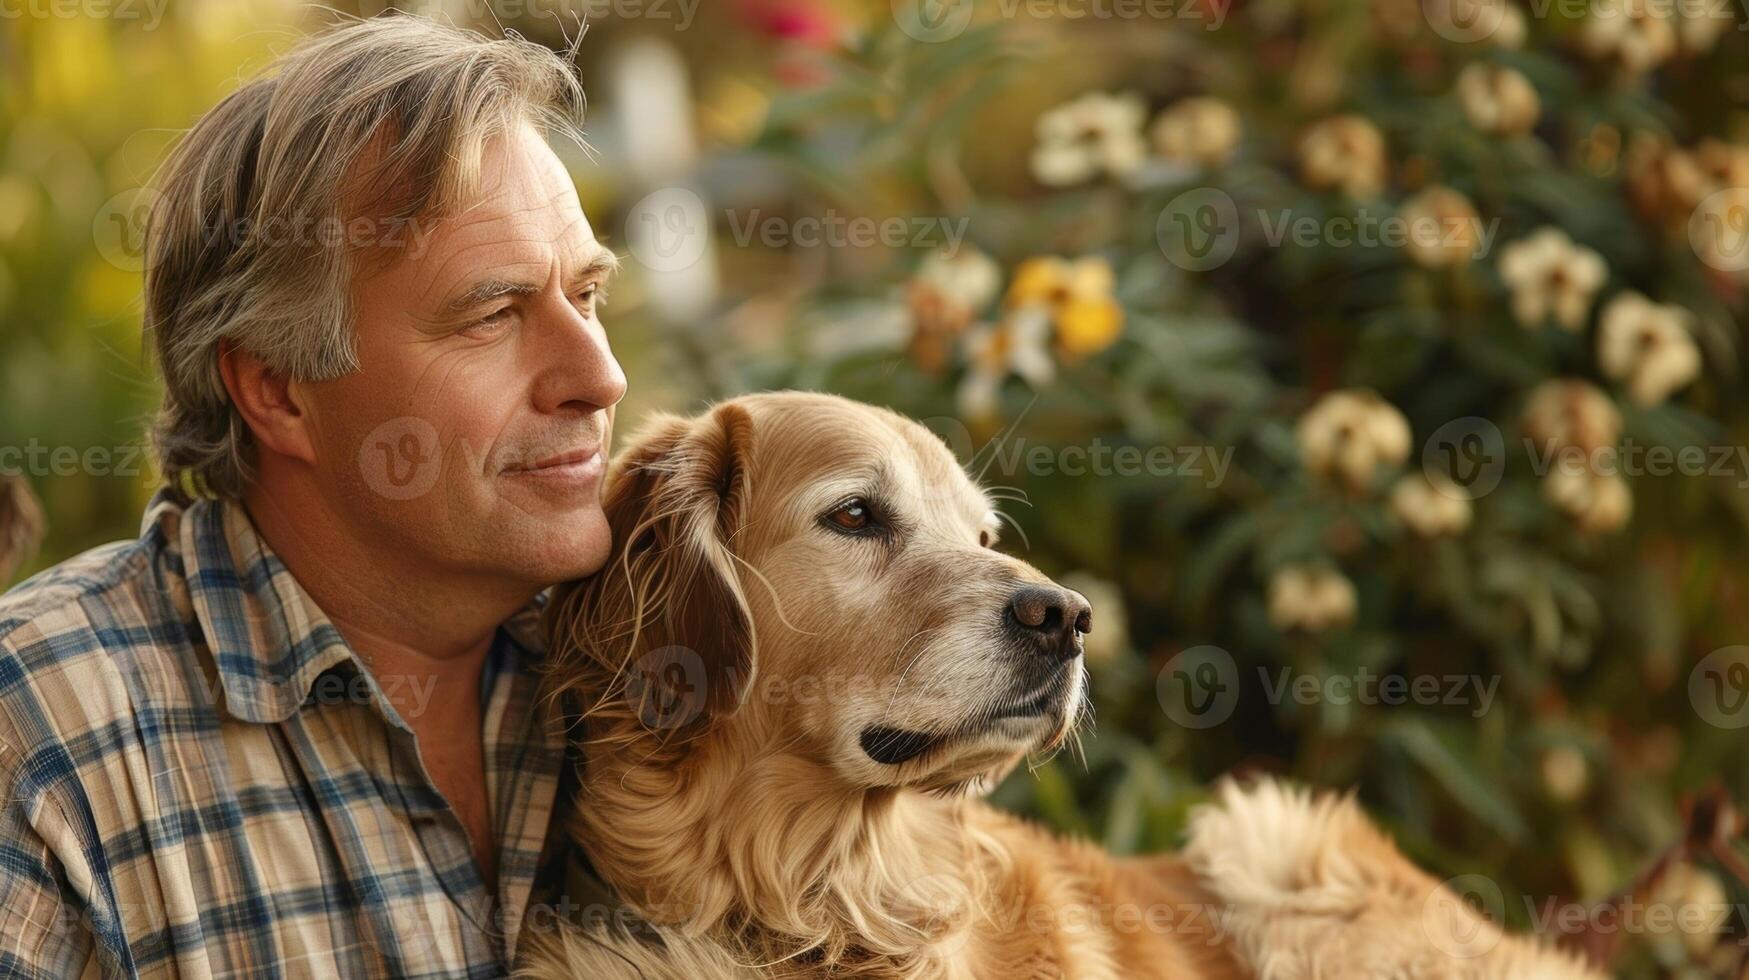 A man sitting in a peaceful garden a serene expression on his face as his dog rests his head on his lap photo